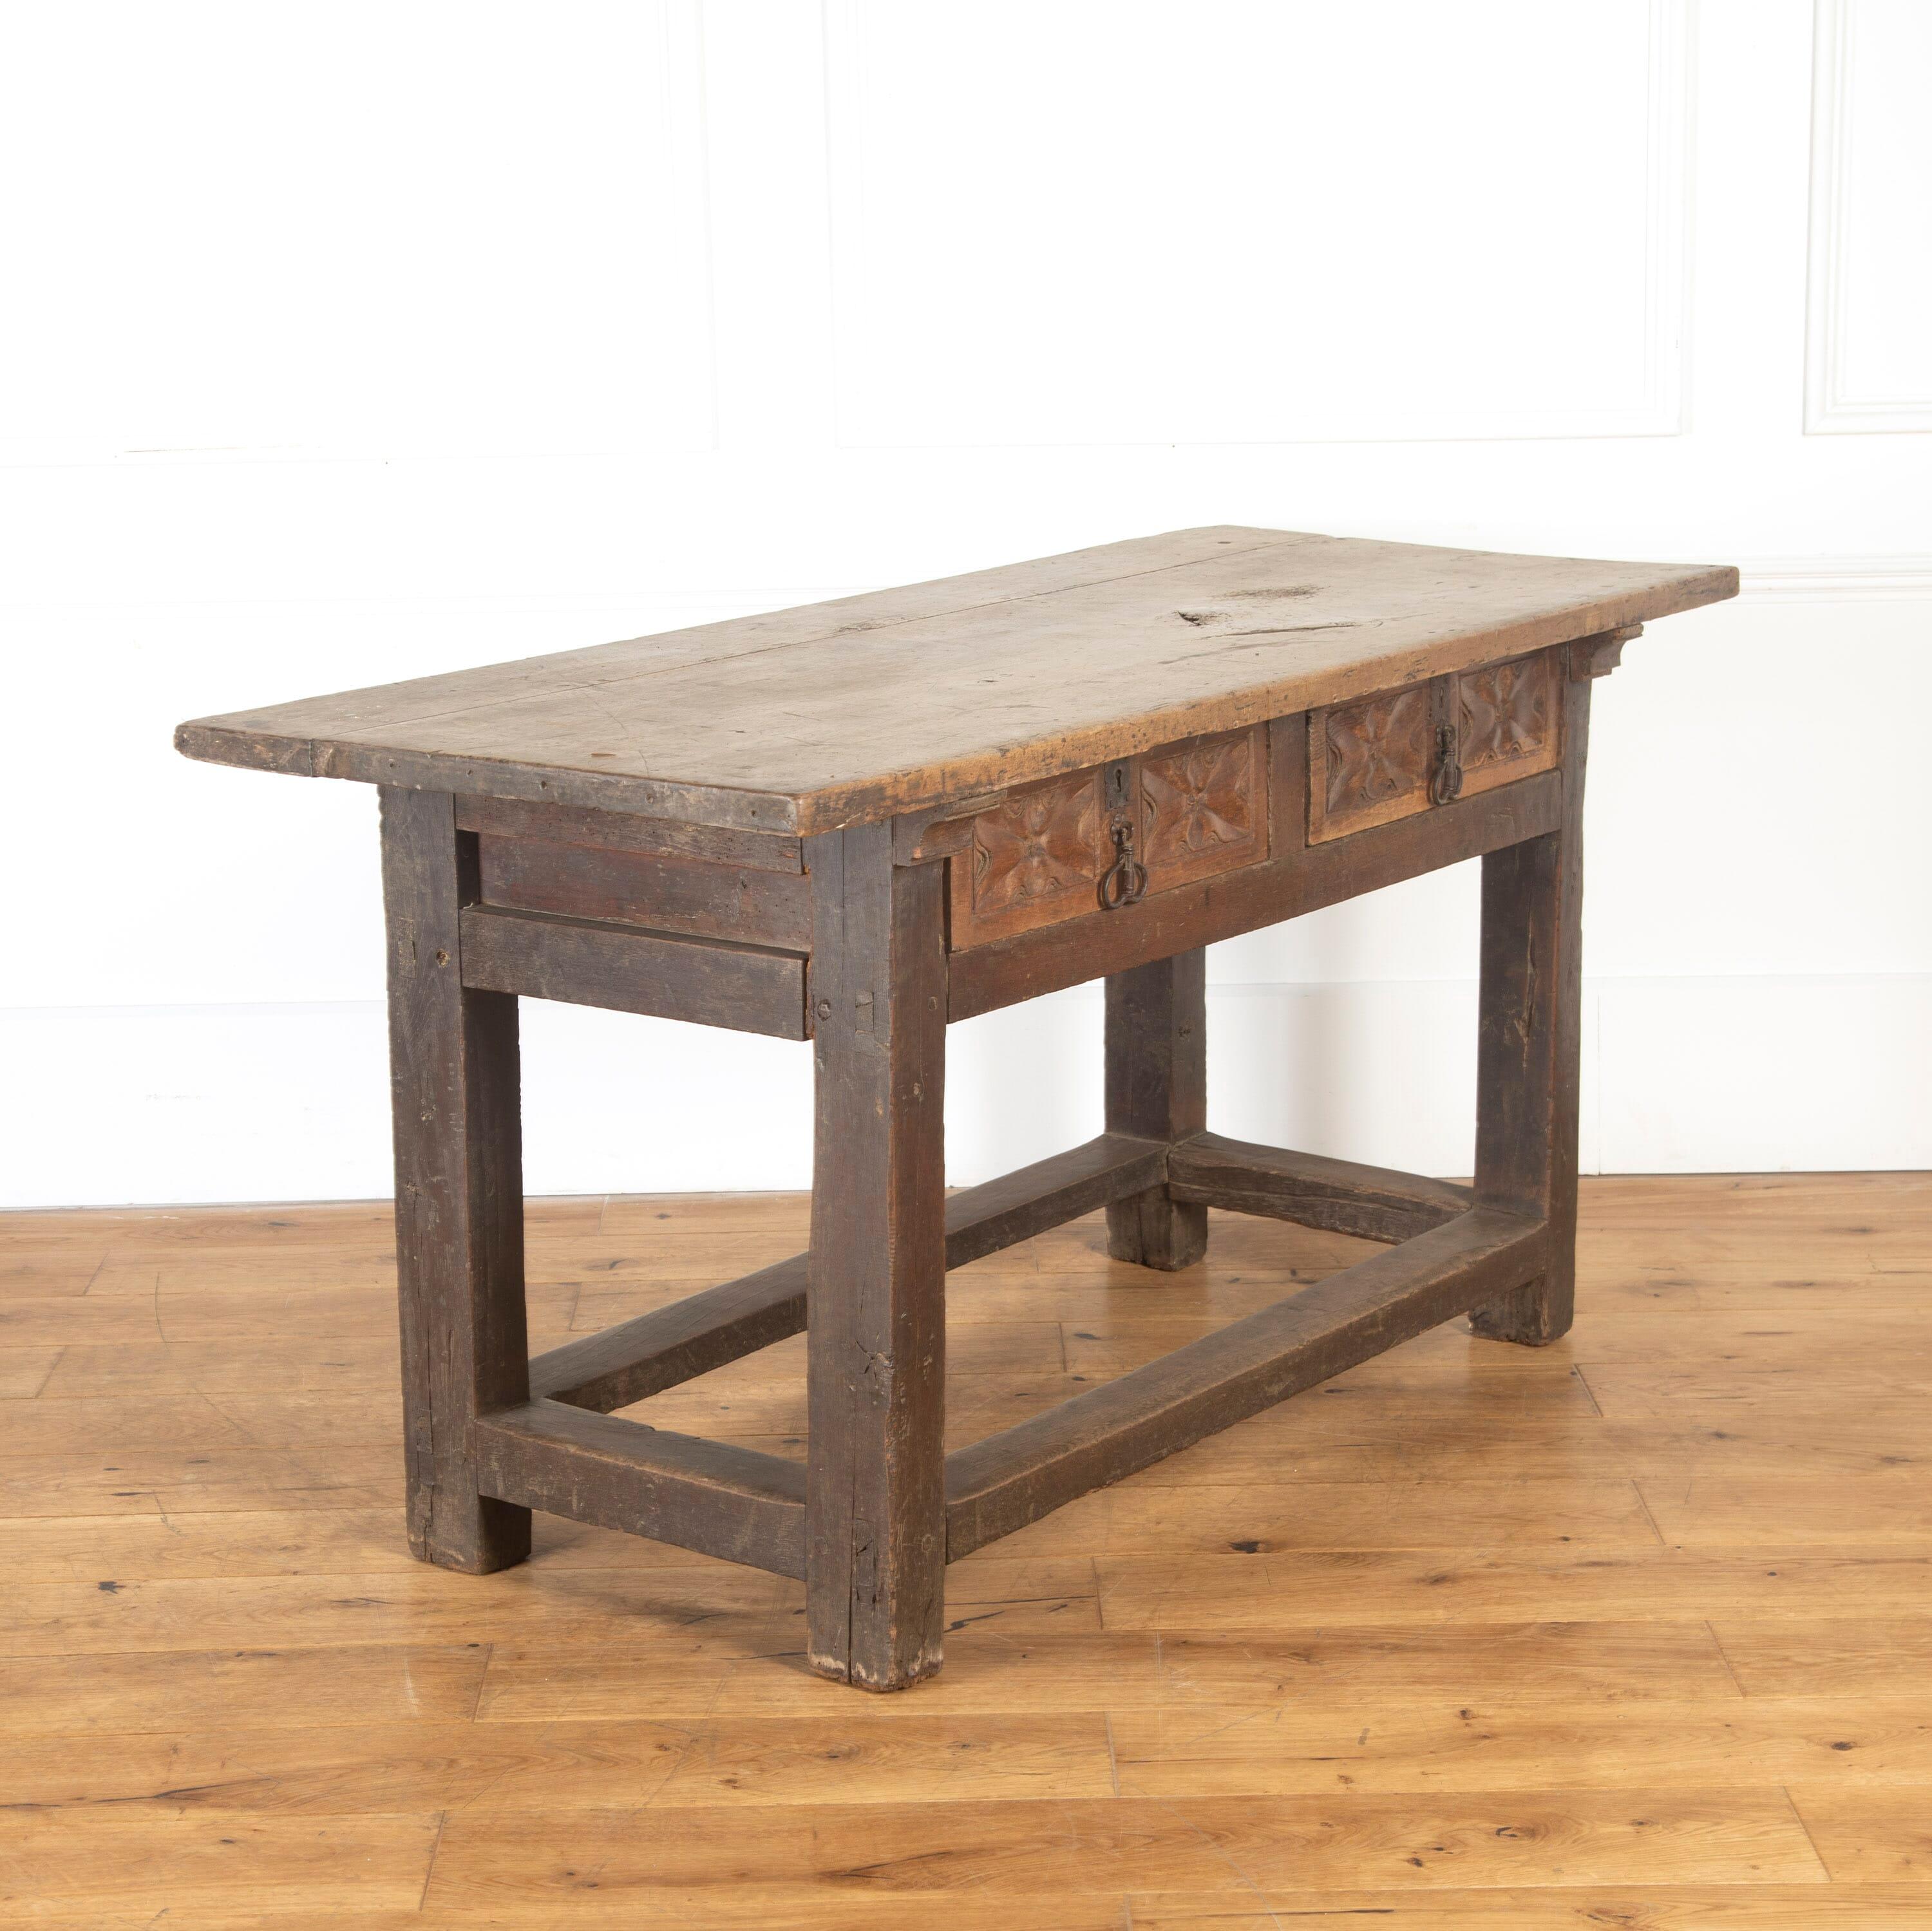 Lovely early 18th century Spanish table.

This table has two carved drawers, both have their original iron handles. 

The walnut tabletop is surmounted by a wonderful chestnut frame. 

A fantastic piece that is in wonderful condition. It has